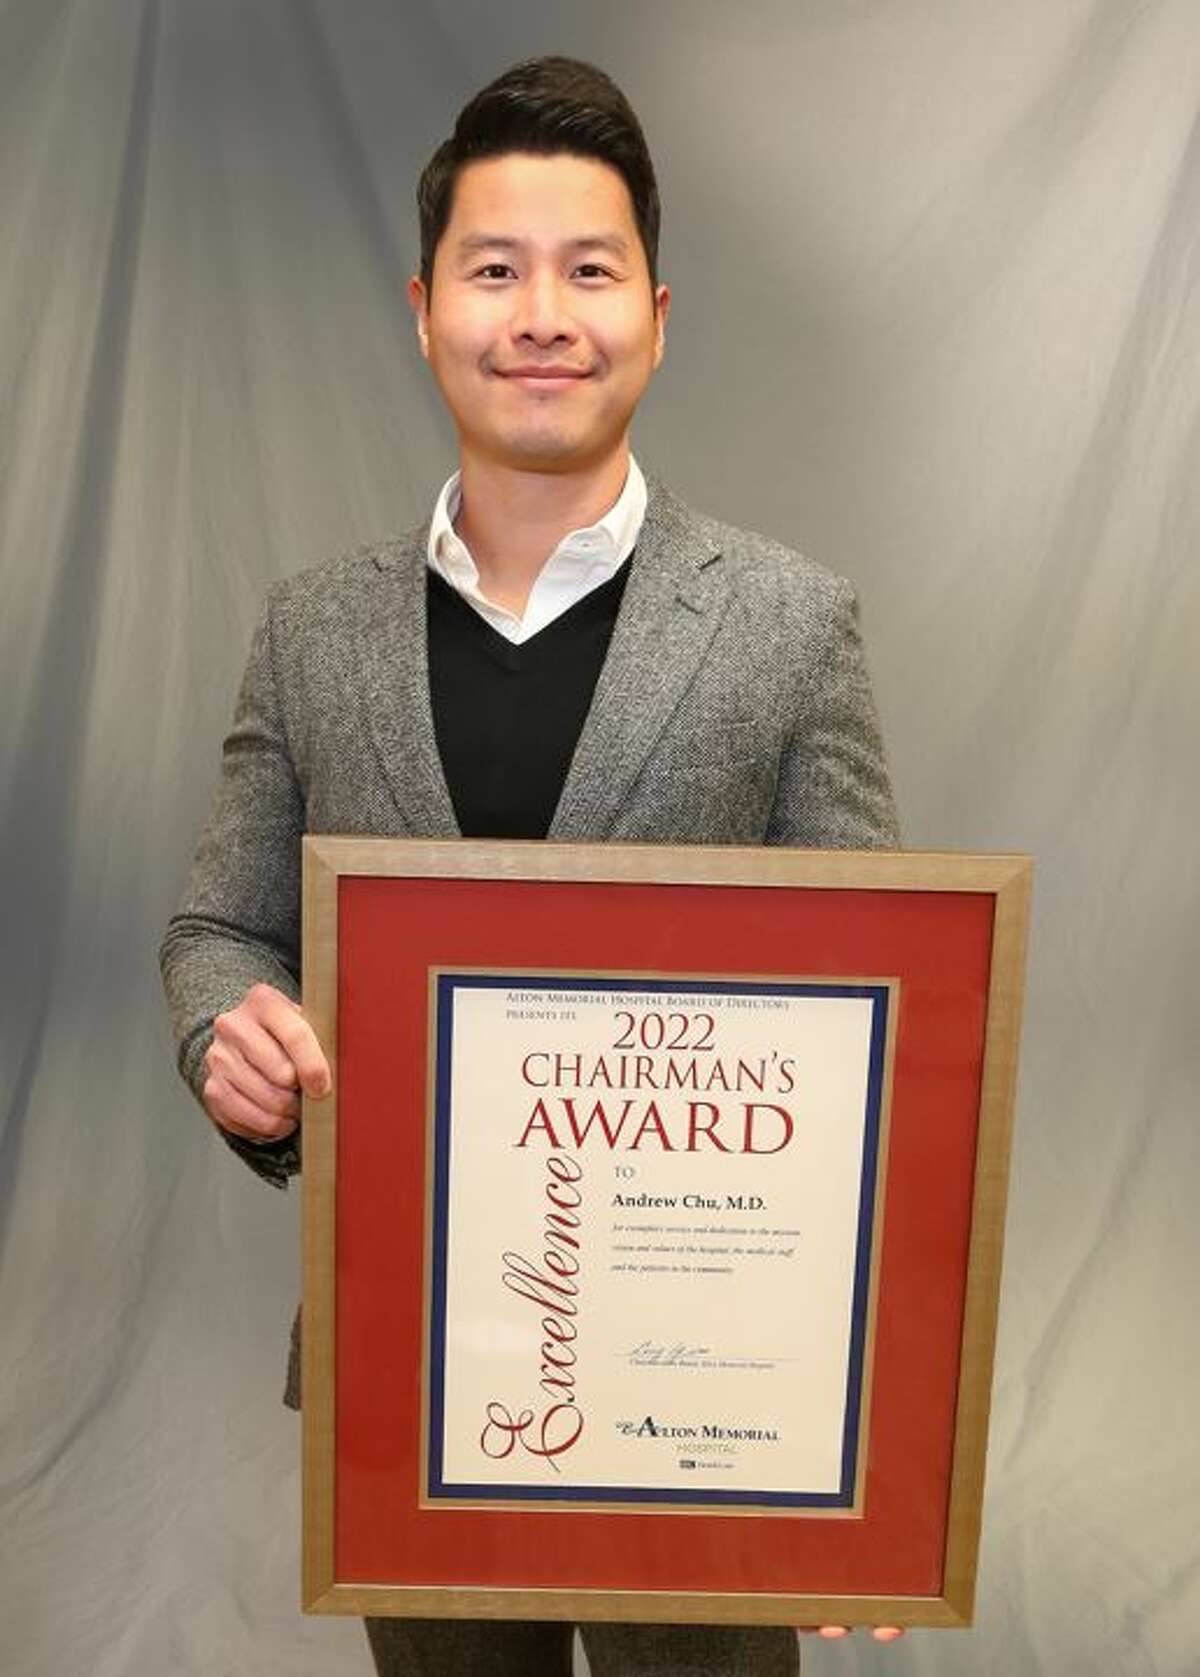 Dr. Andrew Chu, medical director of the Alton Memorial Hospital lab, is the winner of the 2022 Alton Memorial Hospital Chairman’s Award.